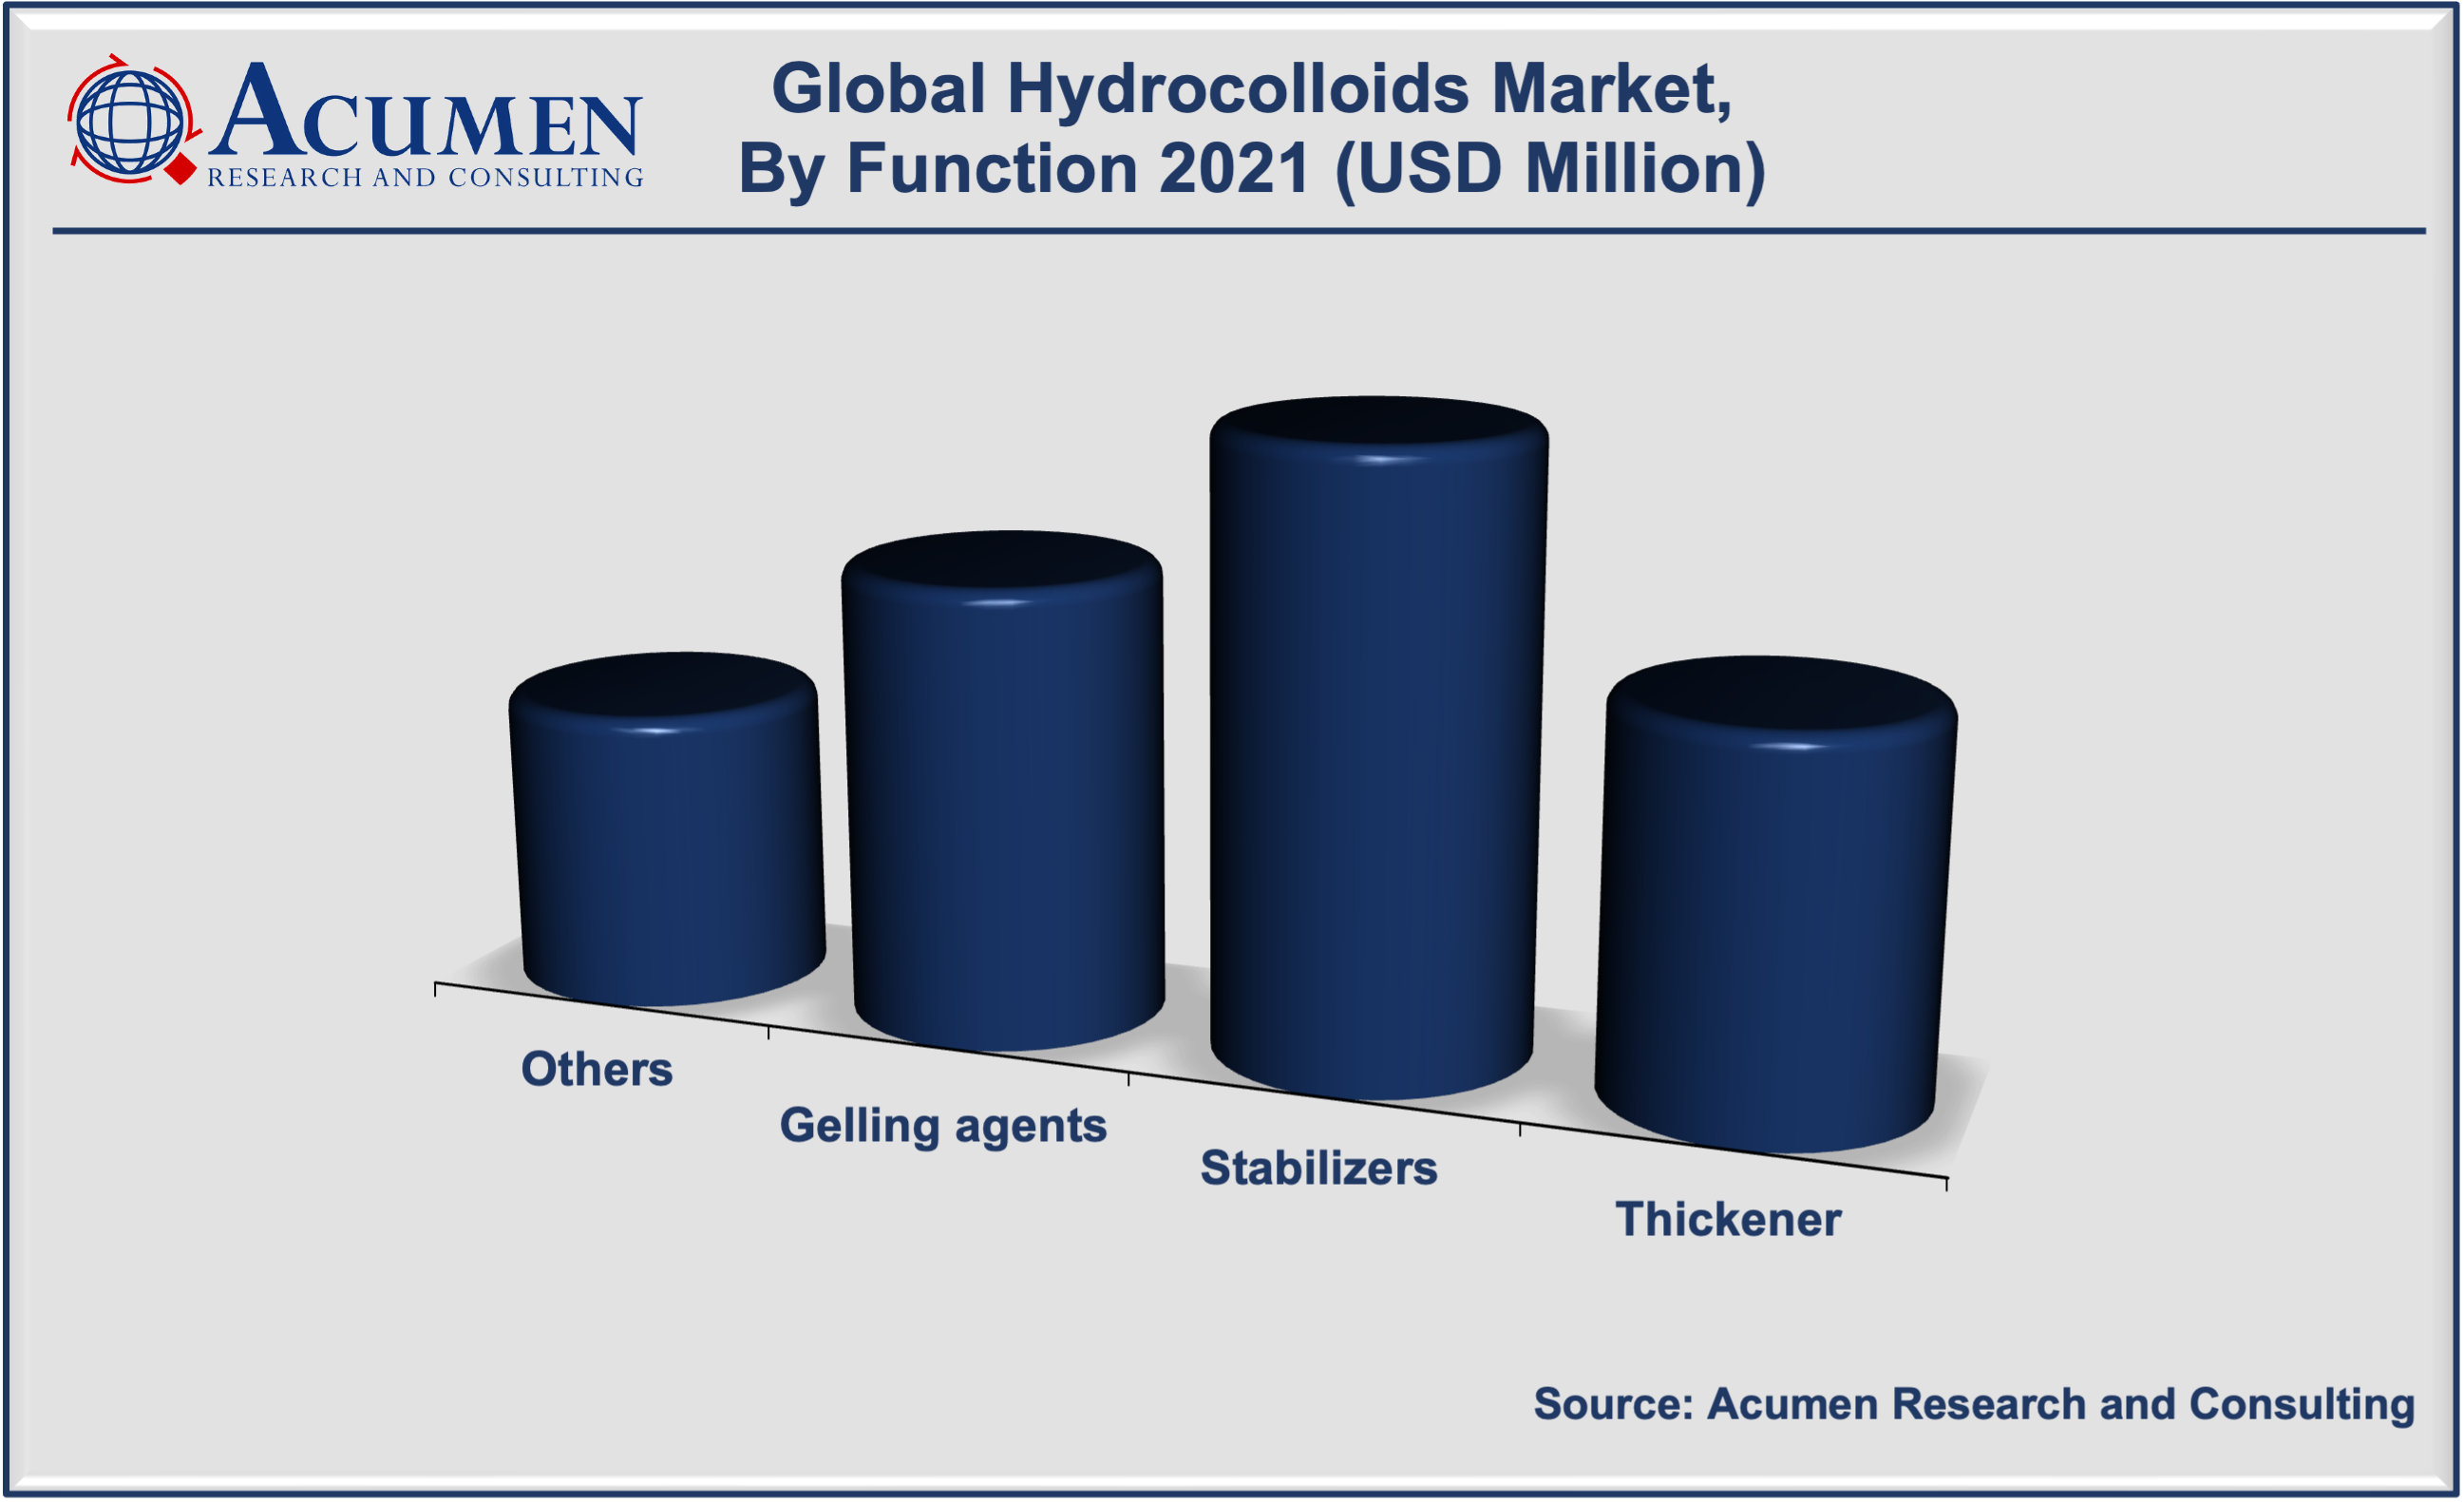 Hydrocolloids Market Size accounted for USD 9,745 Million in 2021 and is expected to reach the market value of USD 16,120 Million by 2030 growing at a CAGR of 5.9% during the forecast period from 2022 to 2030.